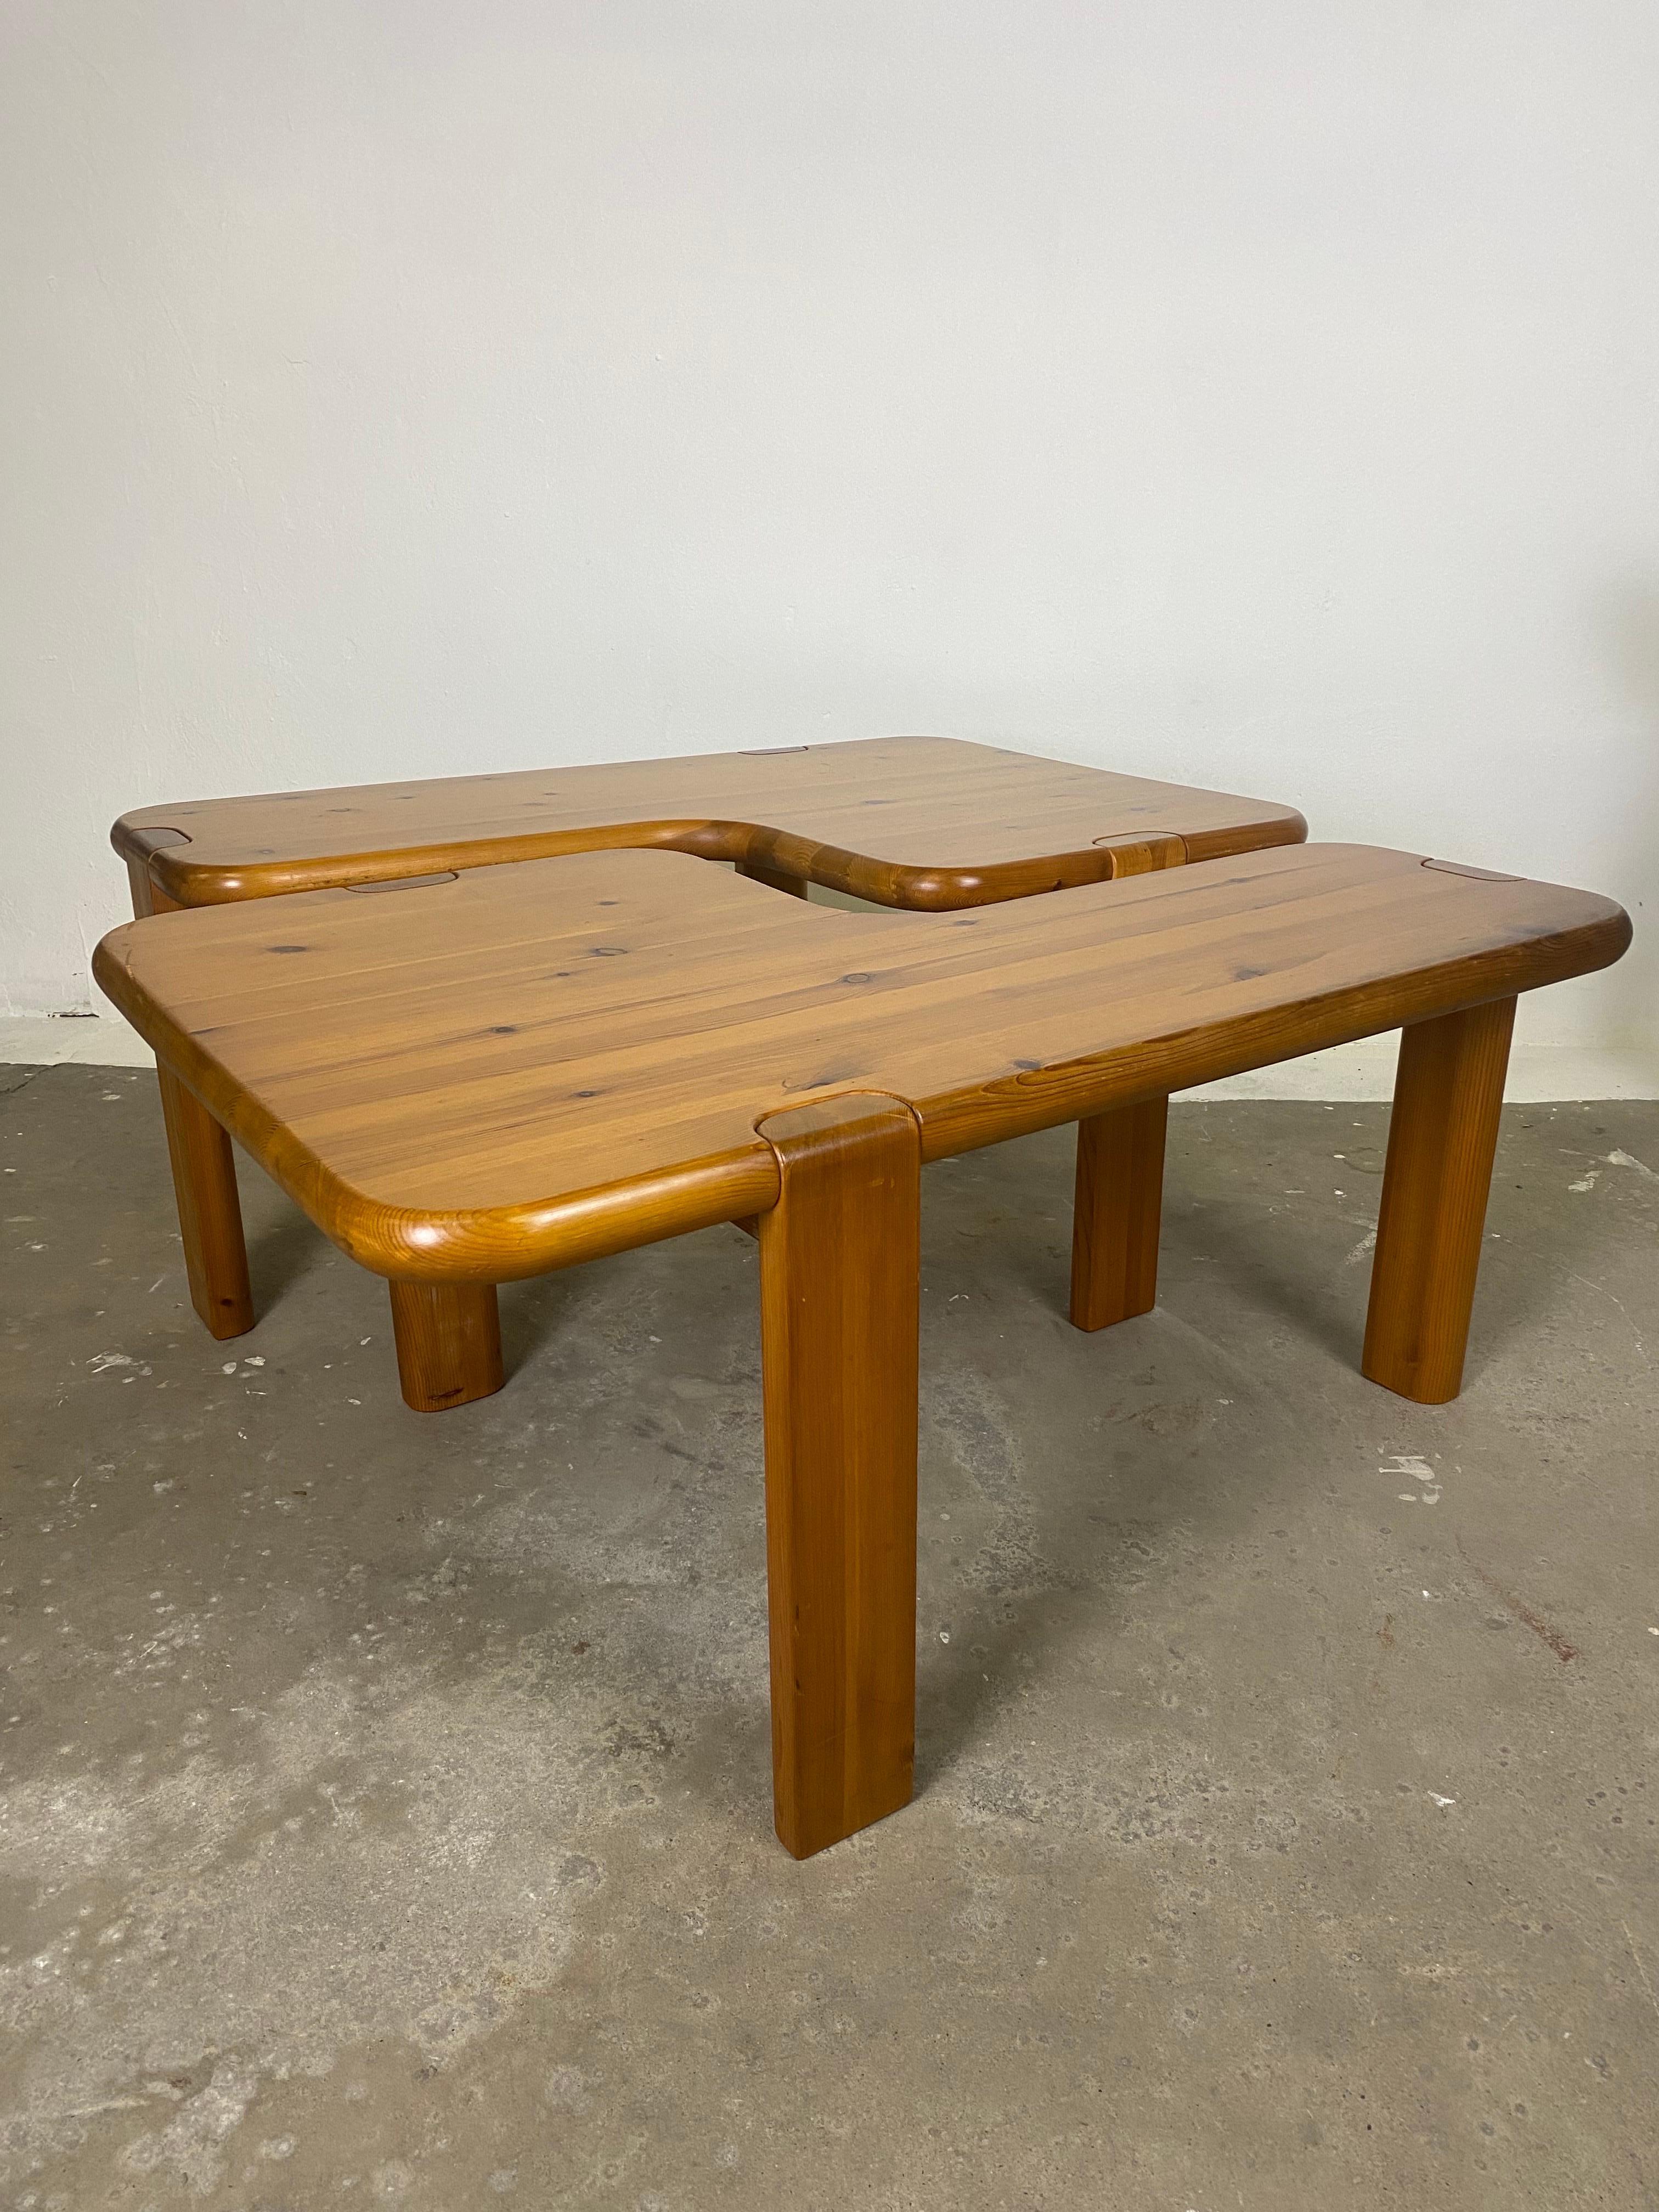 Late 20th Century Set of 2 Midcentury Coffeetables by Aksel Kjersgaard for Odder Furniture 1970s For Sale